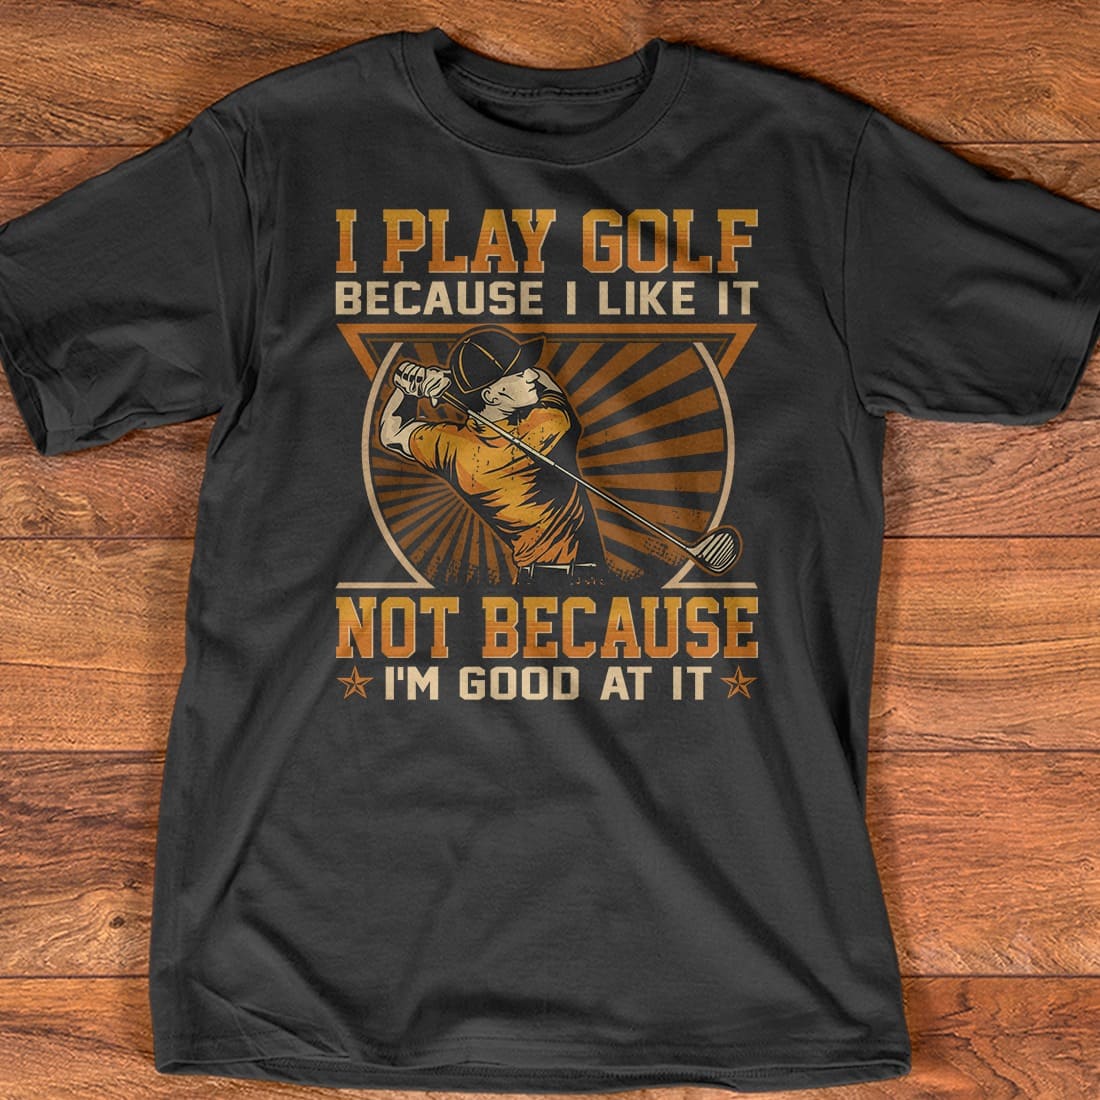 I play golf because I like it not because I'm good at it - Gift for golfers, man playing golf